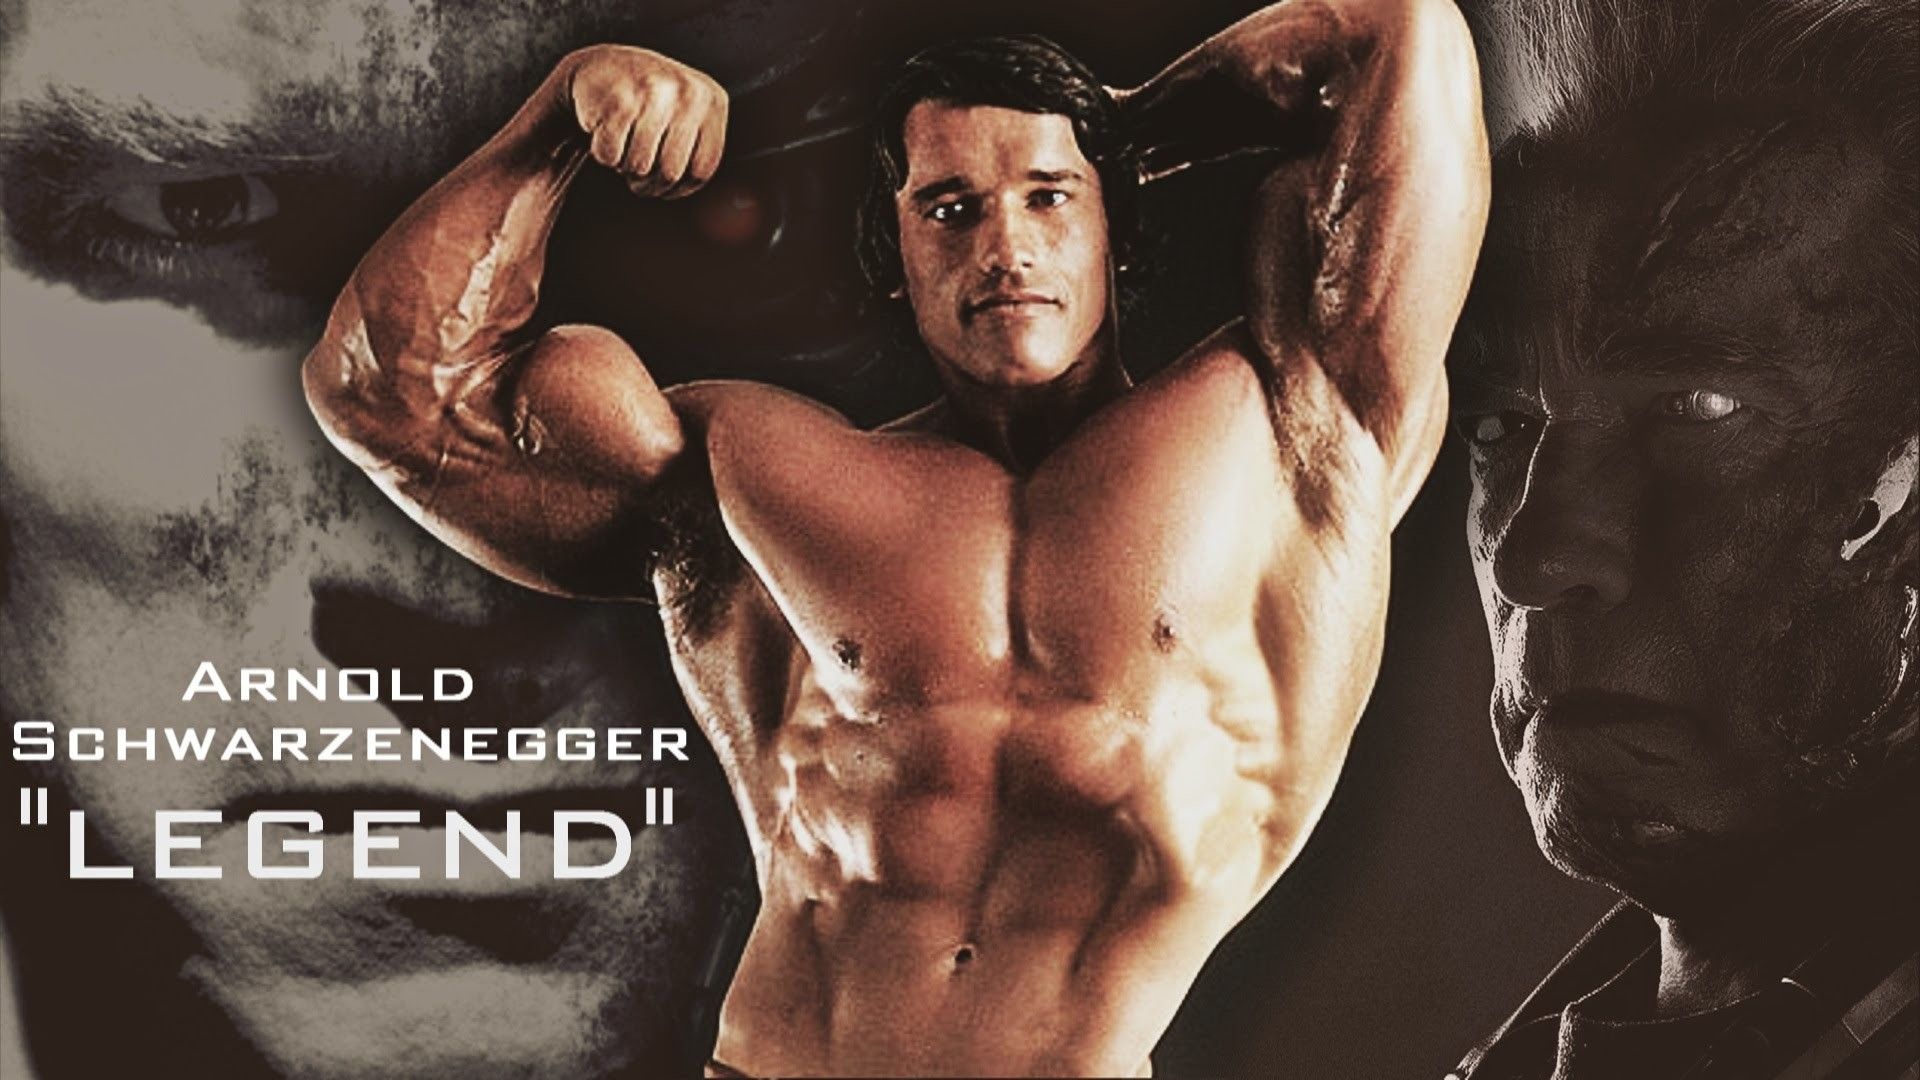 Arnold Schwarzenegger Bodybuilding Wallpapers Posters and Pictures.